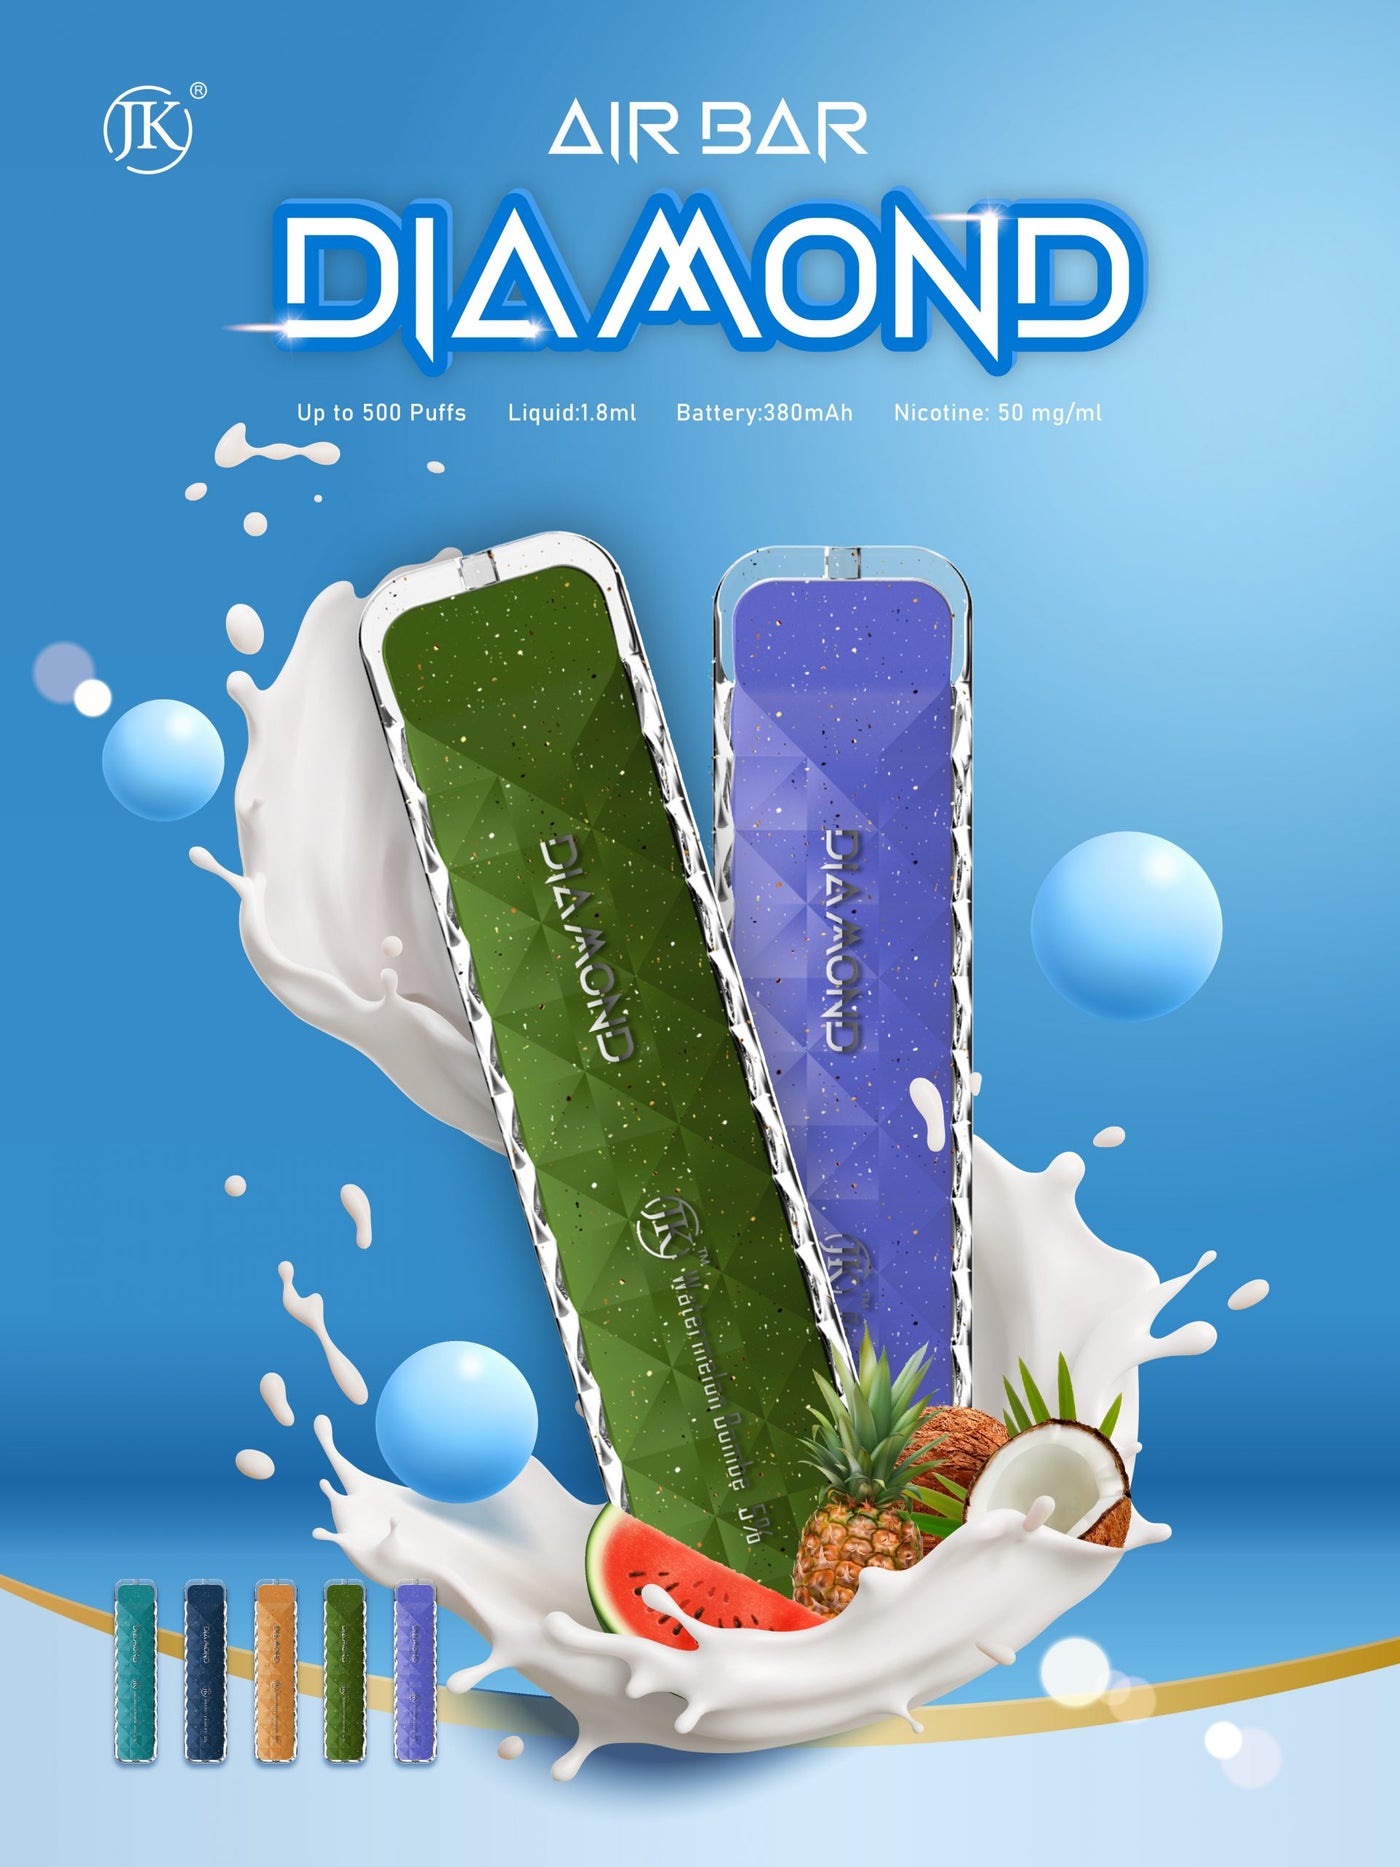 AIRBAR DIAMOND 500 PUFFS DISPOSABLE VAPE (1 COUNT) BUY 2 OR MORE FOR 15% OFF. 30% OFF WITH PURCHASE OF 10.